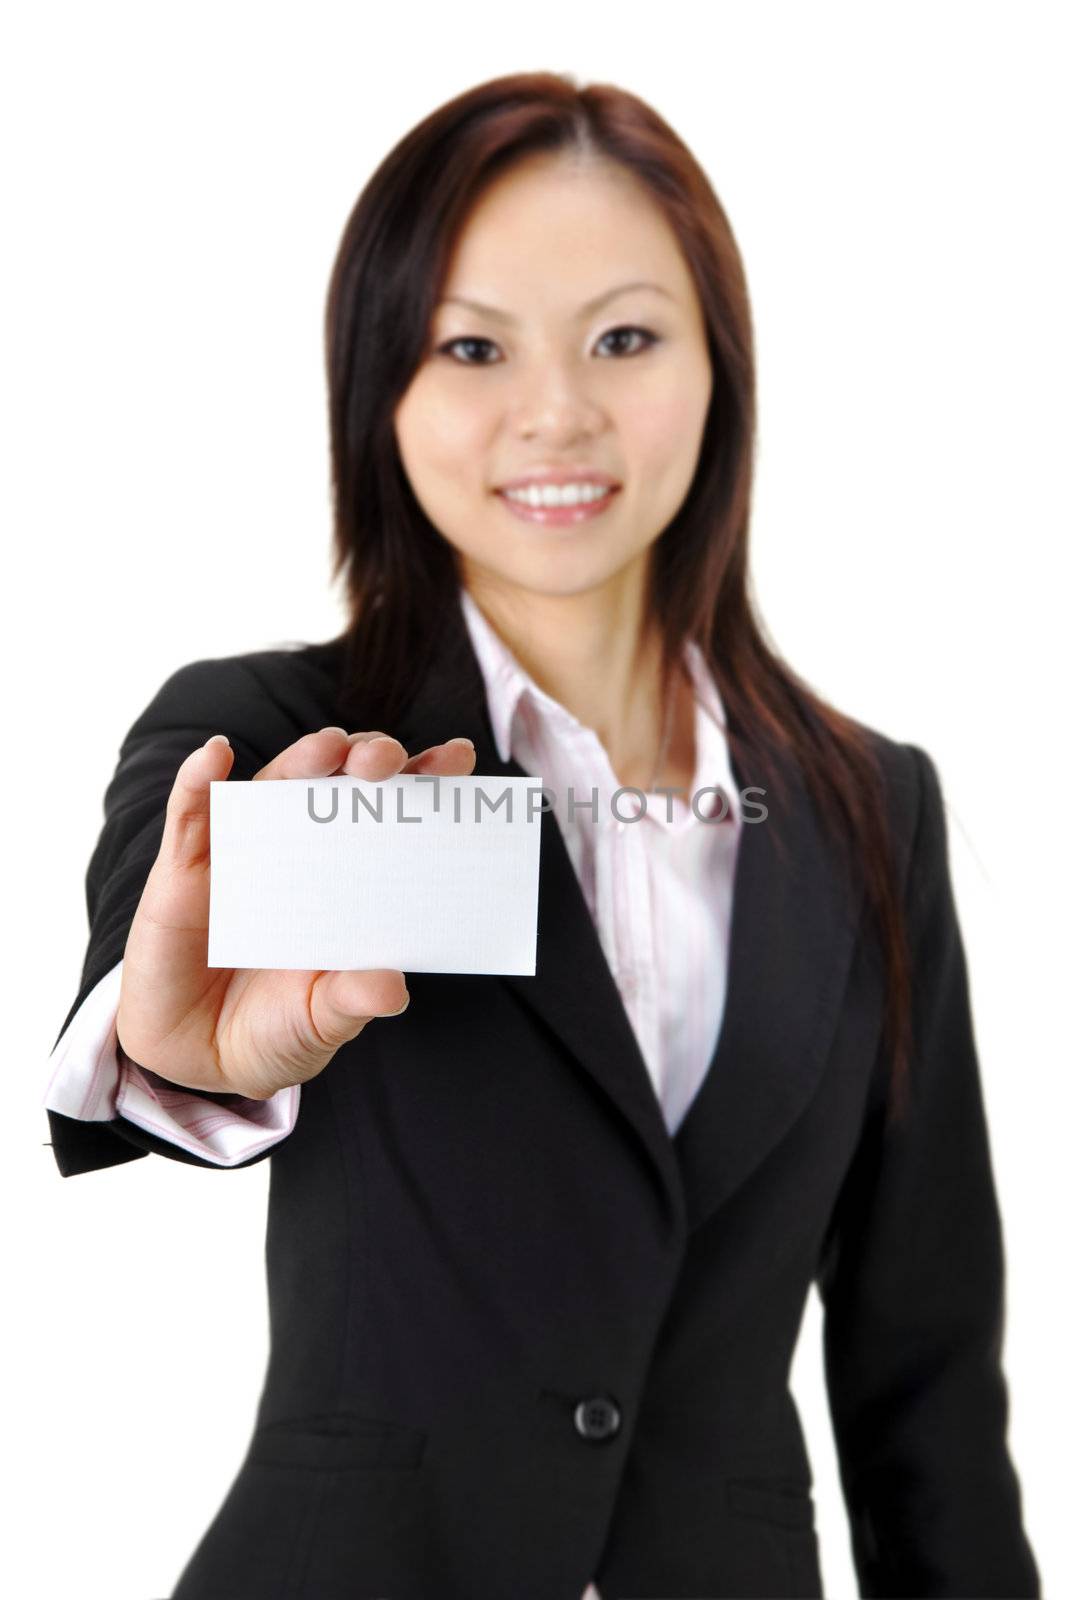 Asian businesswoman holding a blank business card and smiling at the camera